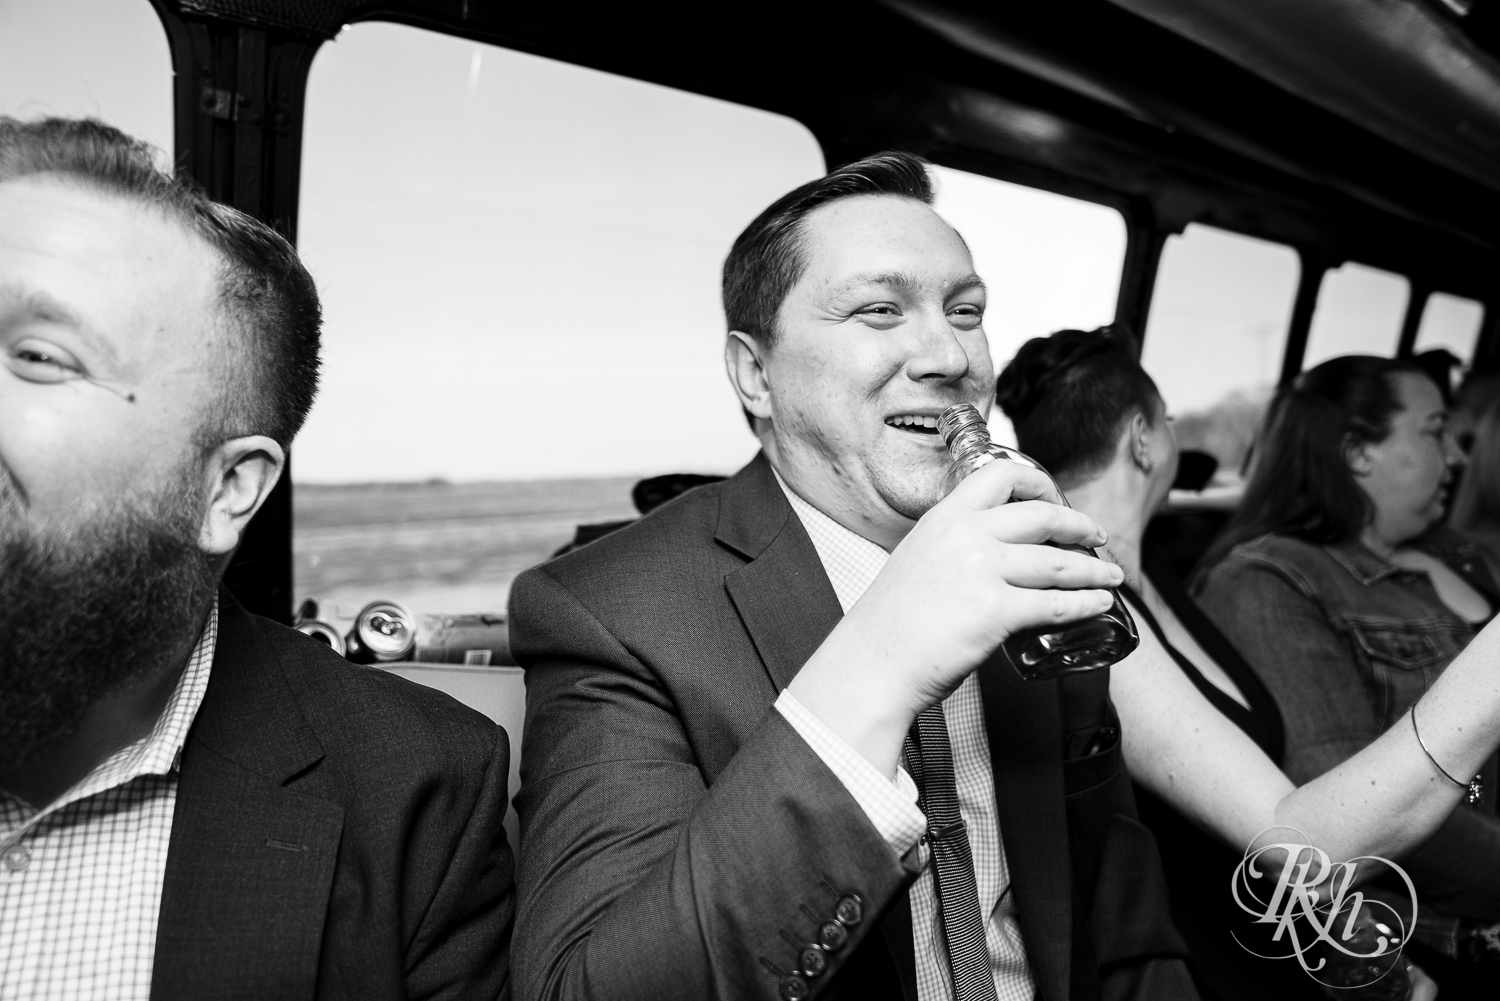 Bride and groom drink with wedding party on party bus after wedding ceremony in Faribault, Minnesota.